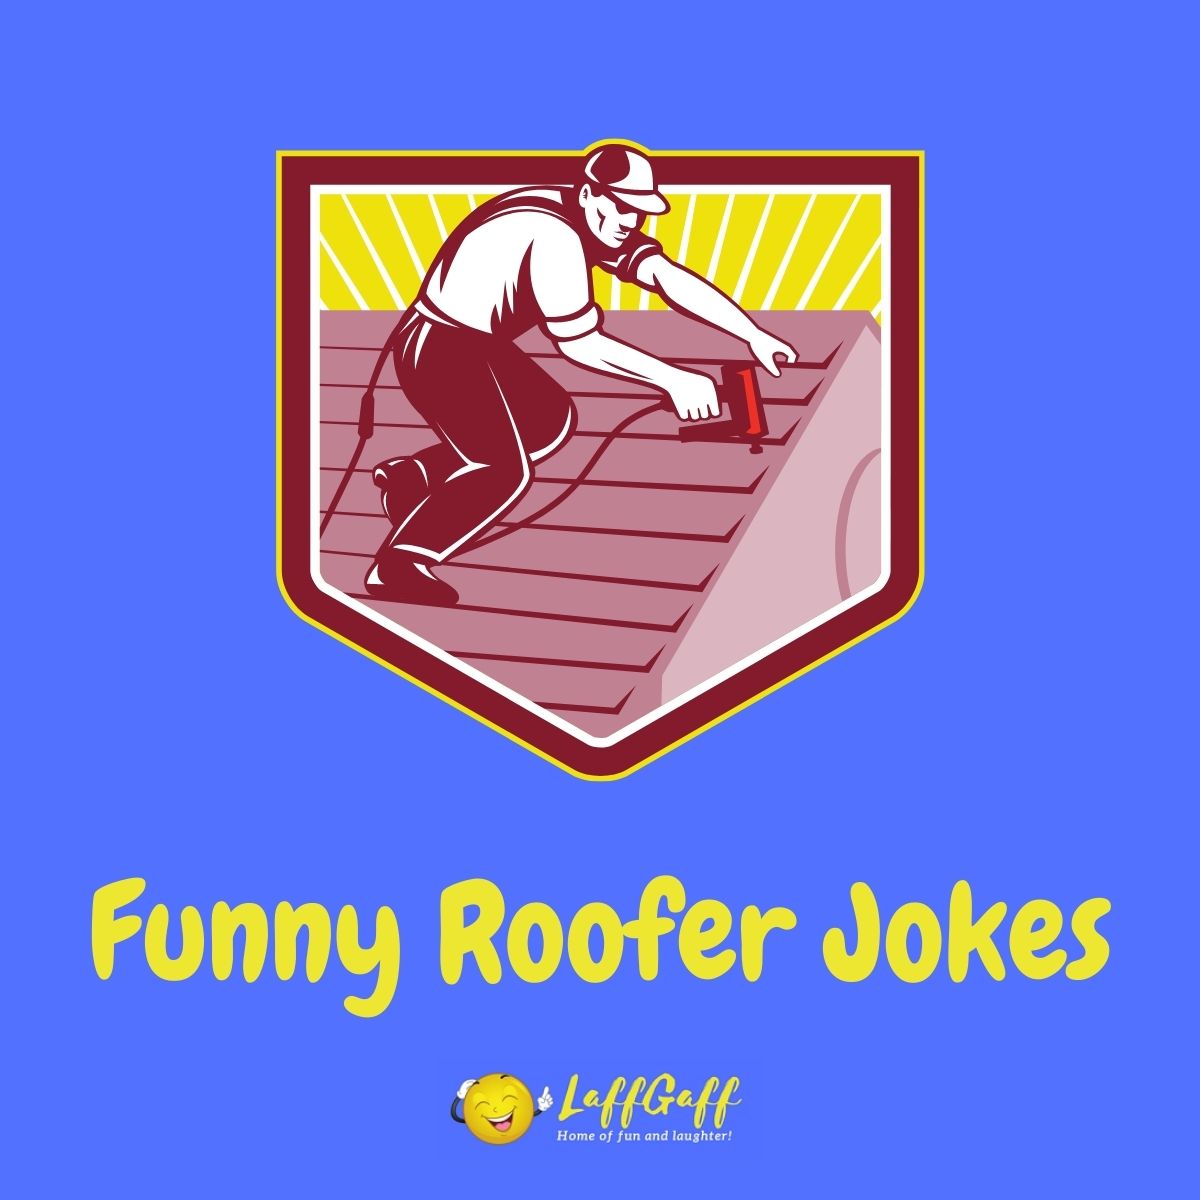 Featured image for a page of funny roof jokes and roofer jokes.